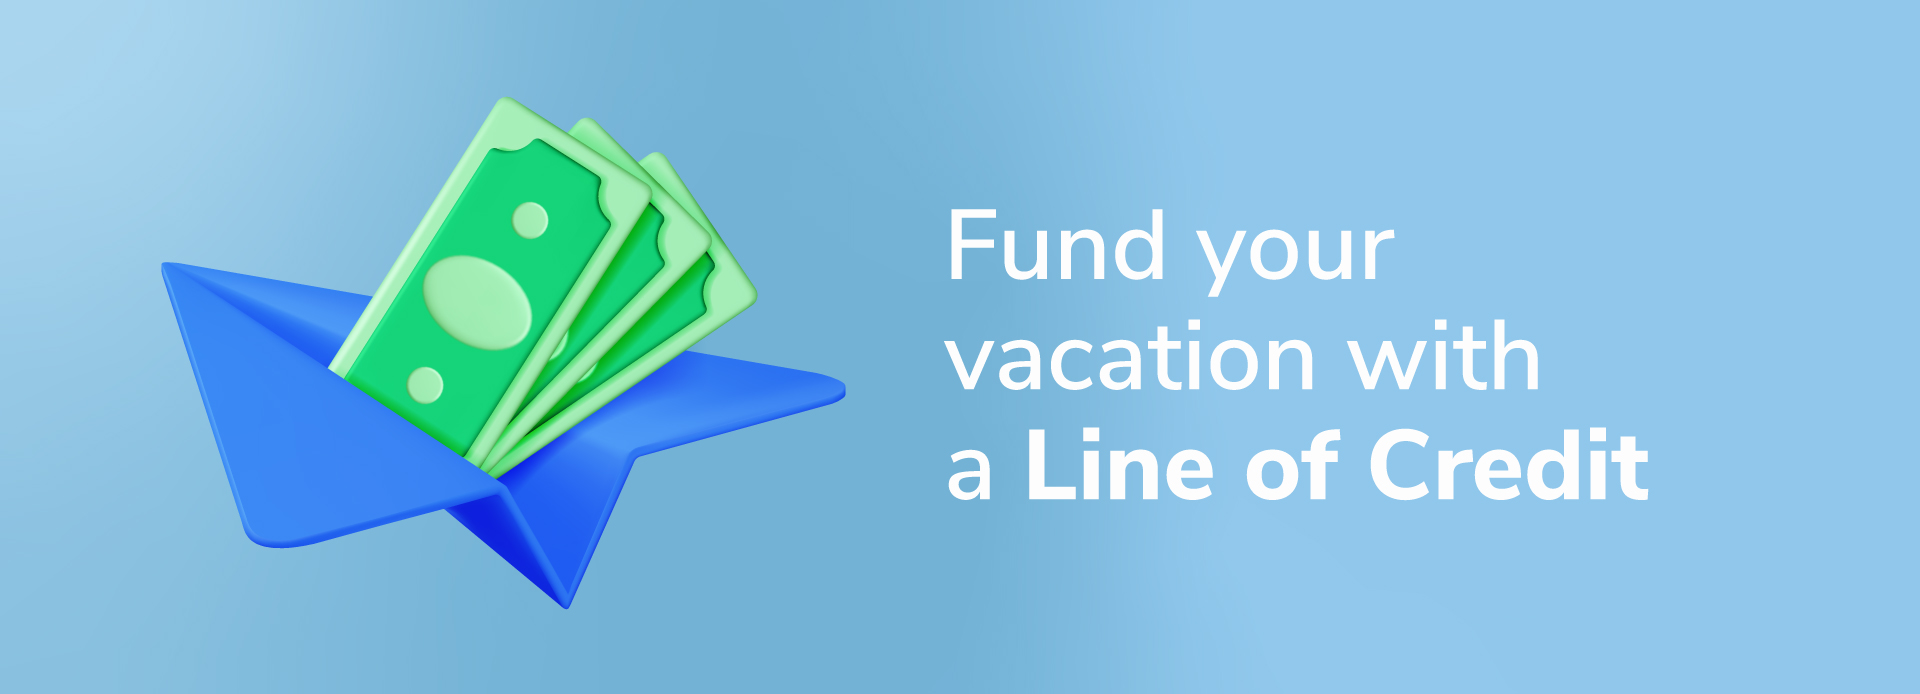 How a Line of Credit Can Help You Fund Your Vacation